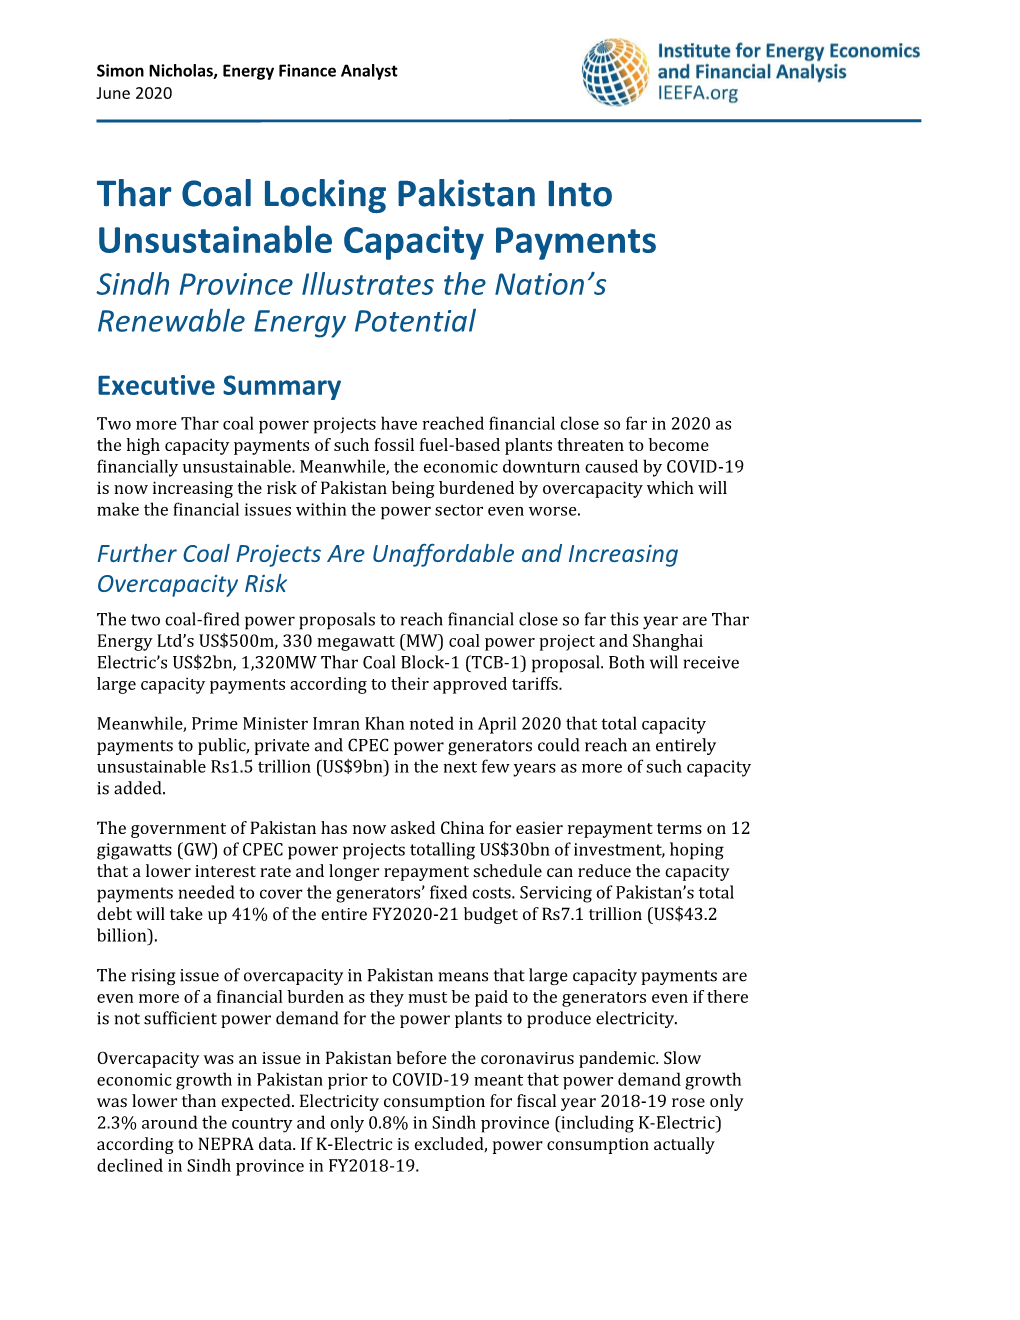 Thar Coal Locking Pakistan Into Unsustainable Capacity Payments Sindh Province Illustrates the Nation’S Renewable Energy Potential